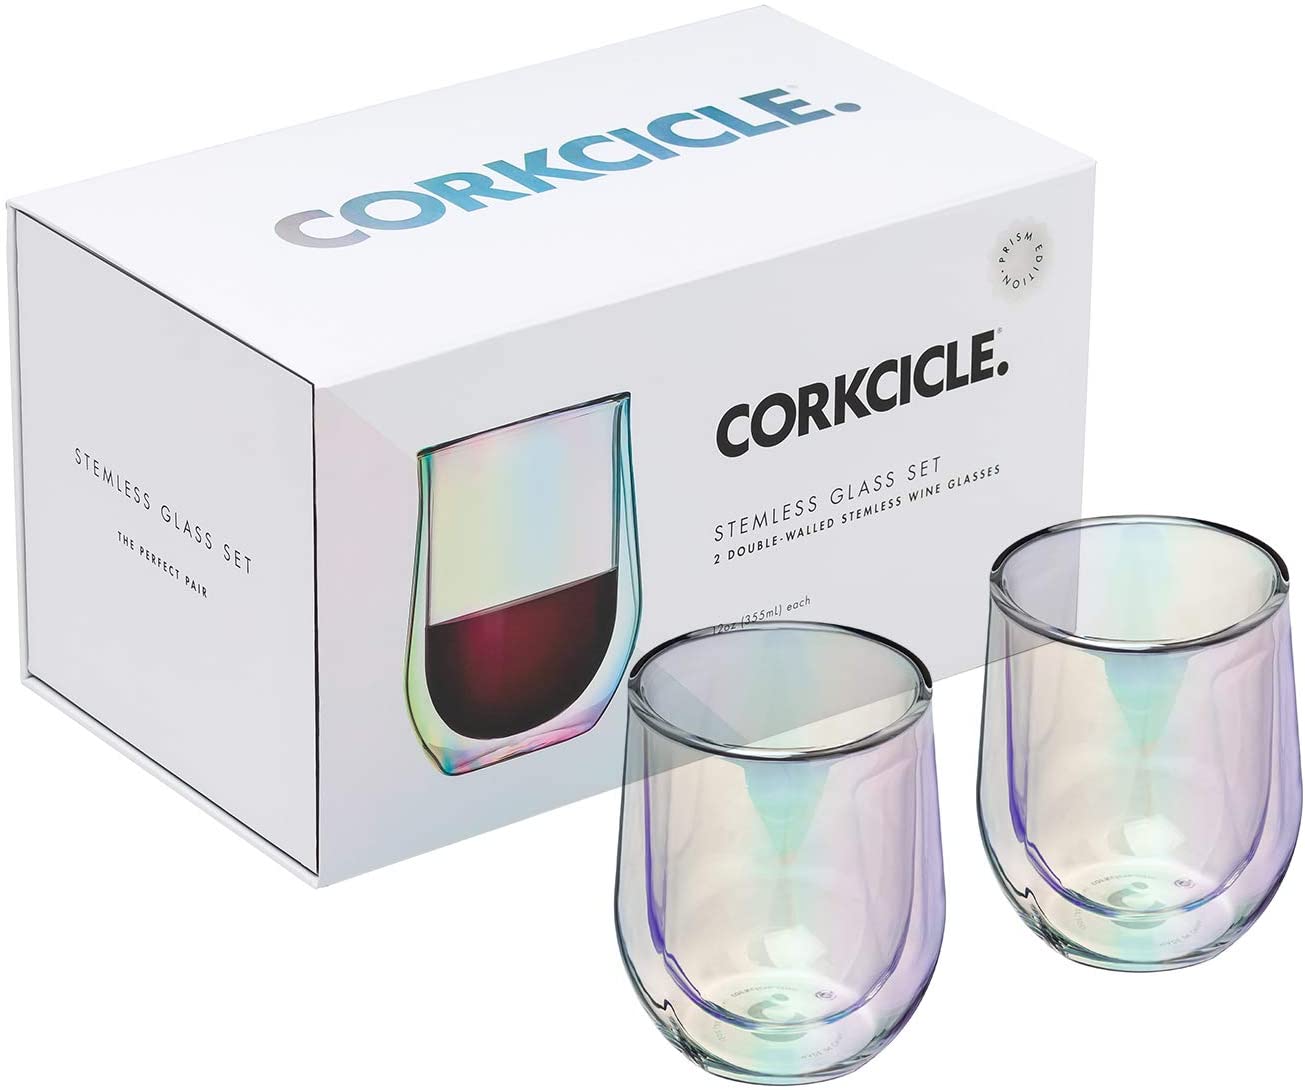 Corkcicle Glass Flute Double Pack 7 oz in Prism